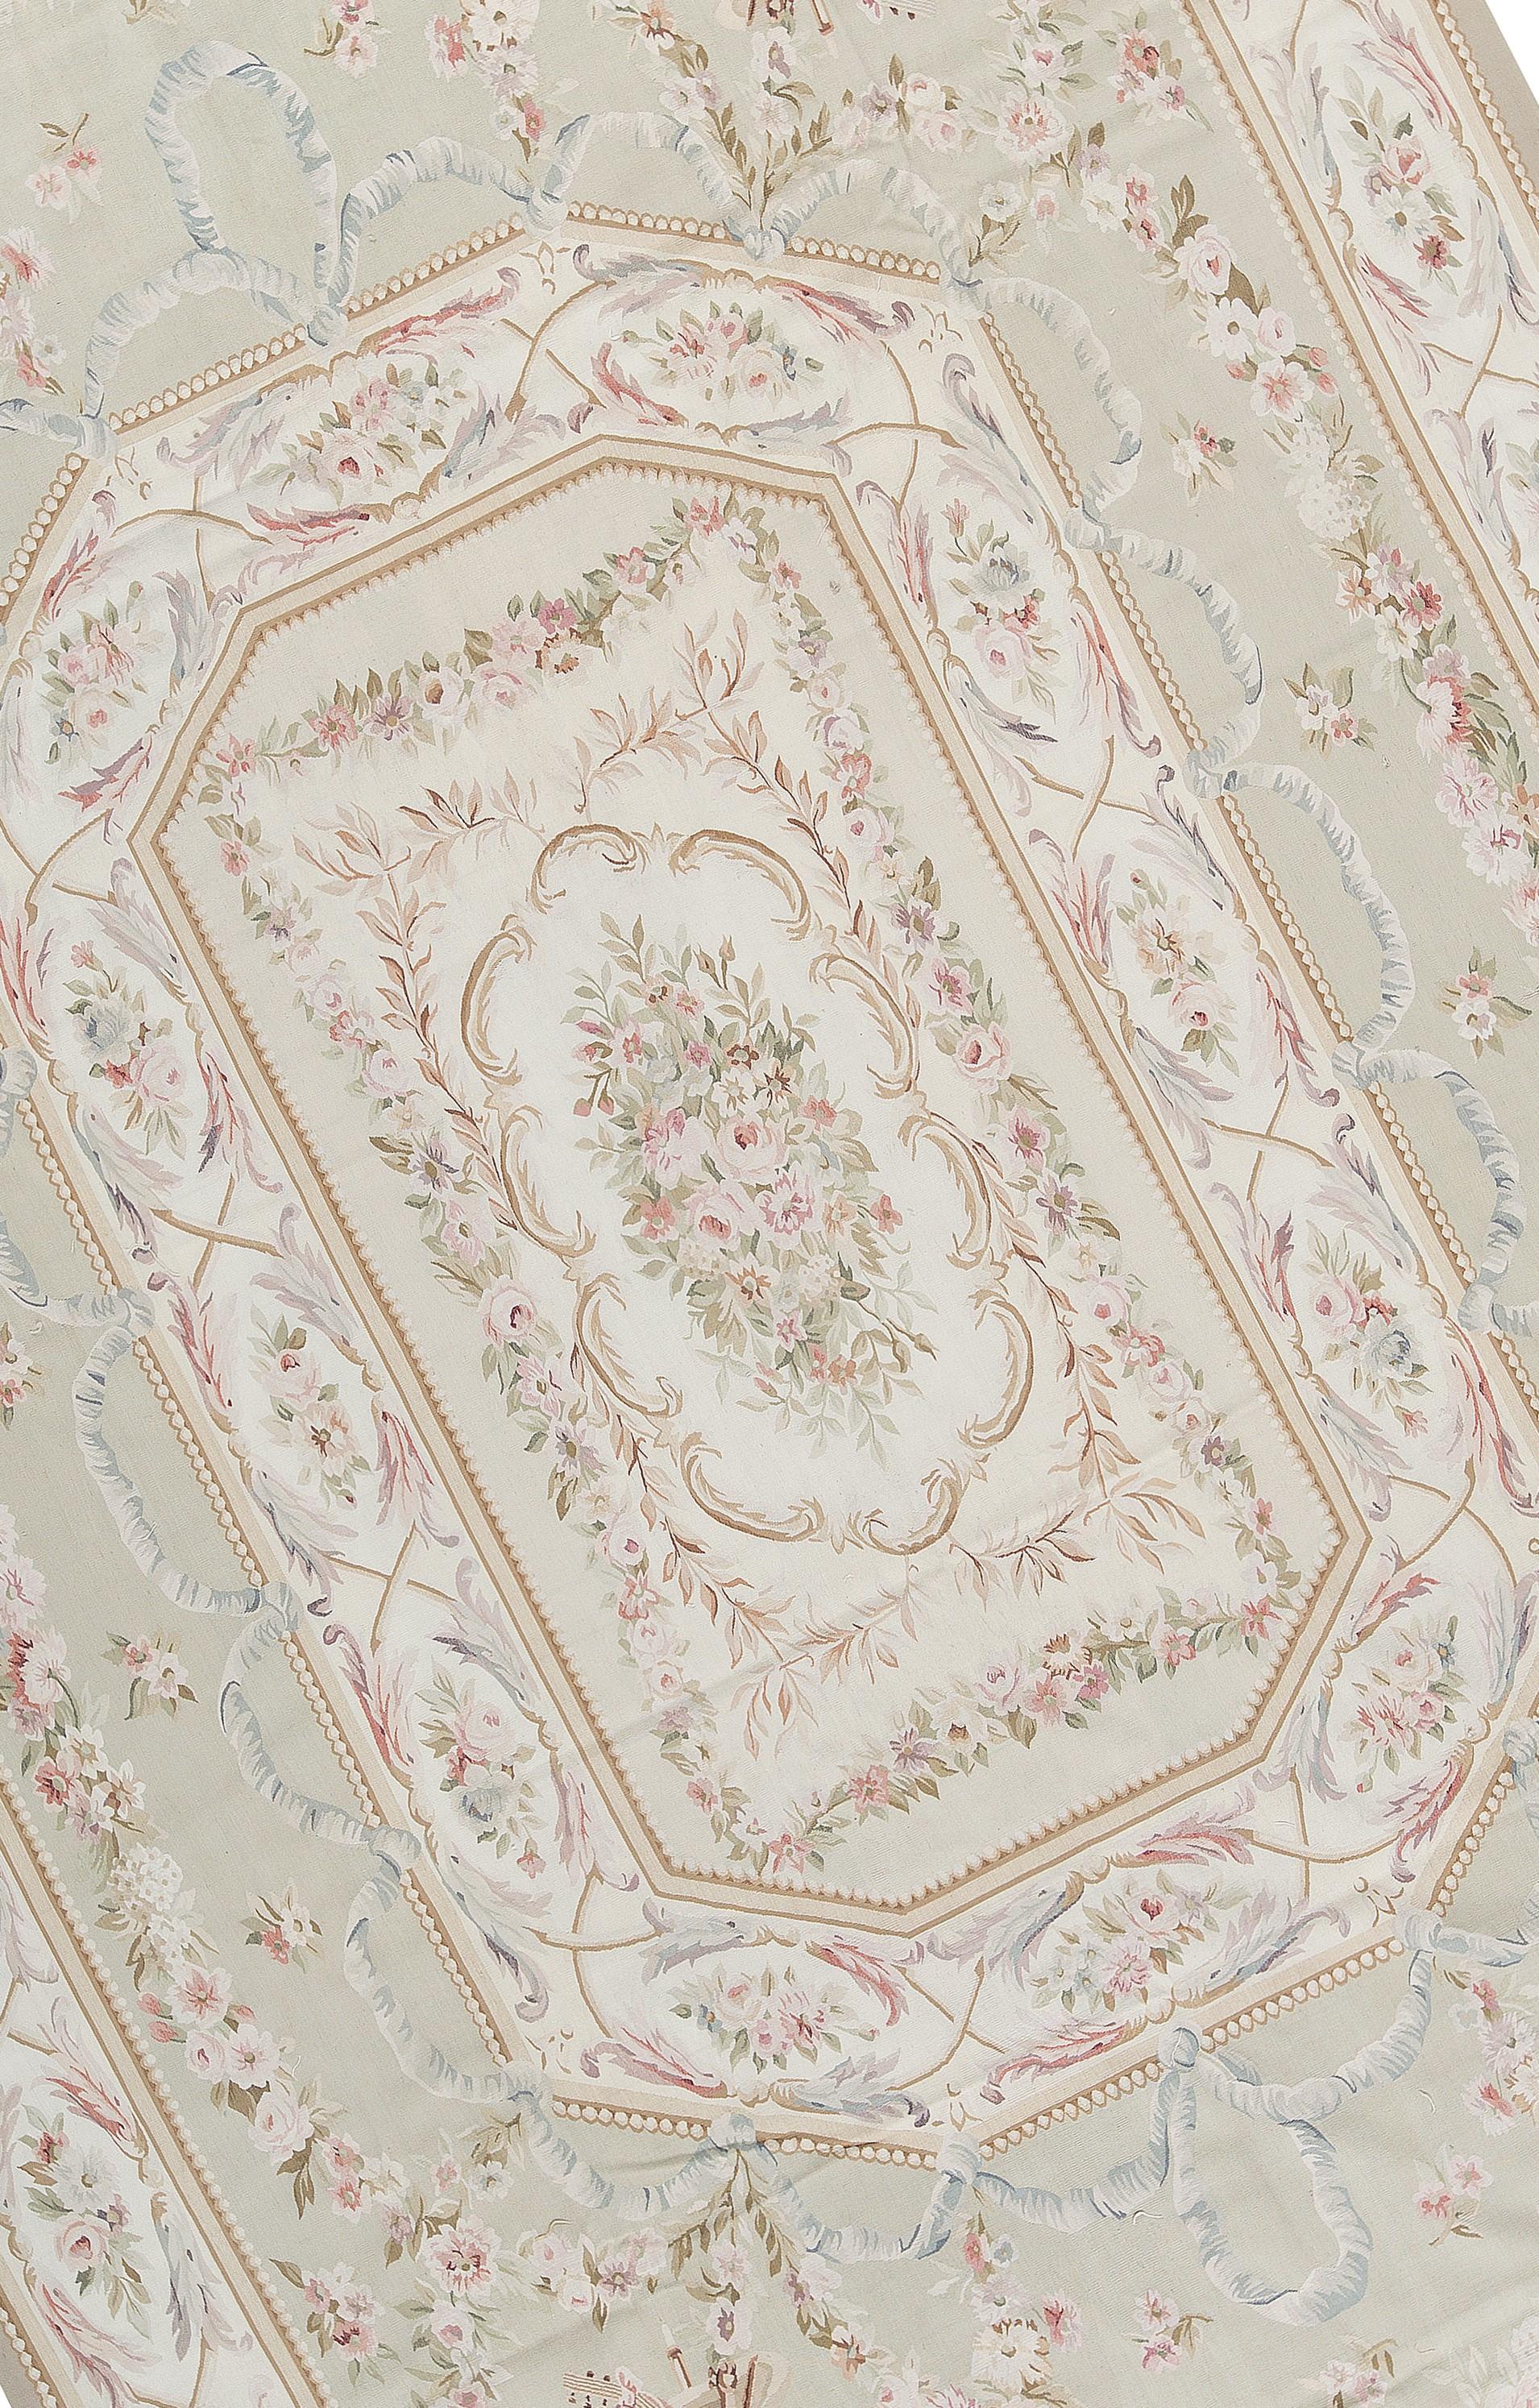 Hand Woven Recreation of the classic French flat weave Aubusson rugs that have been found in the finest homes and palaces since the late 17th century. Size 11' 8'' x 18' 1''